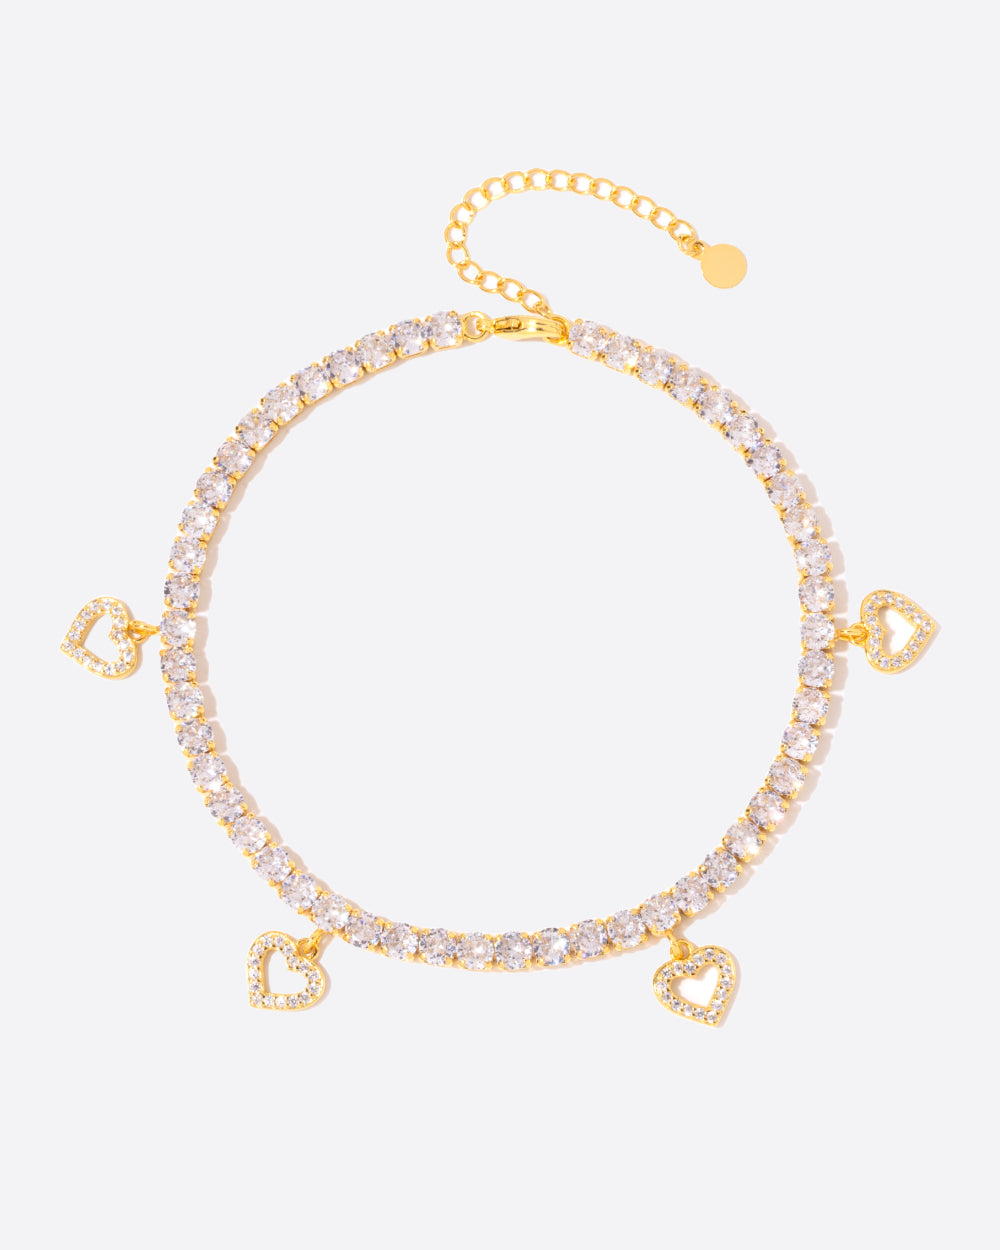 ICED HEARTS TENNIS ANKLET. - 4MM 18K GOLD